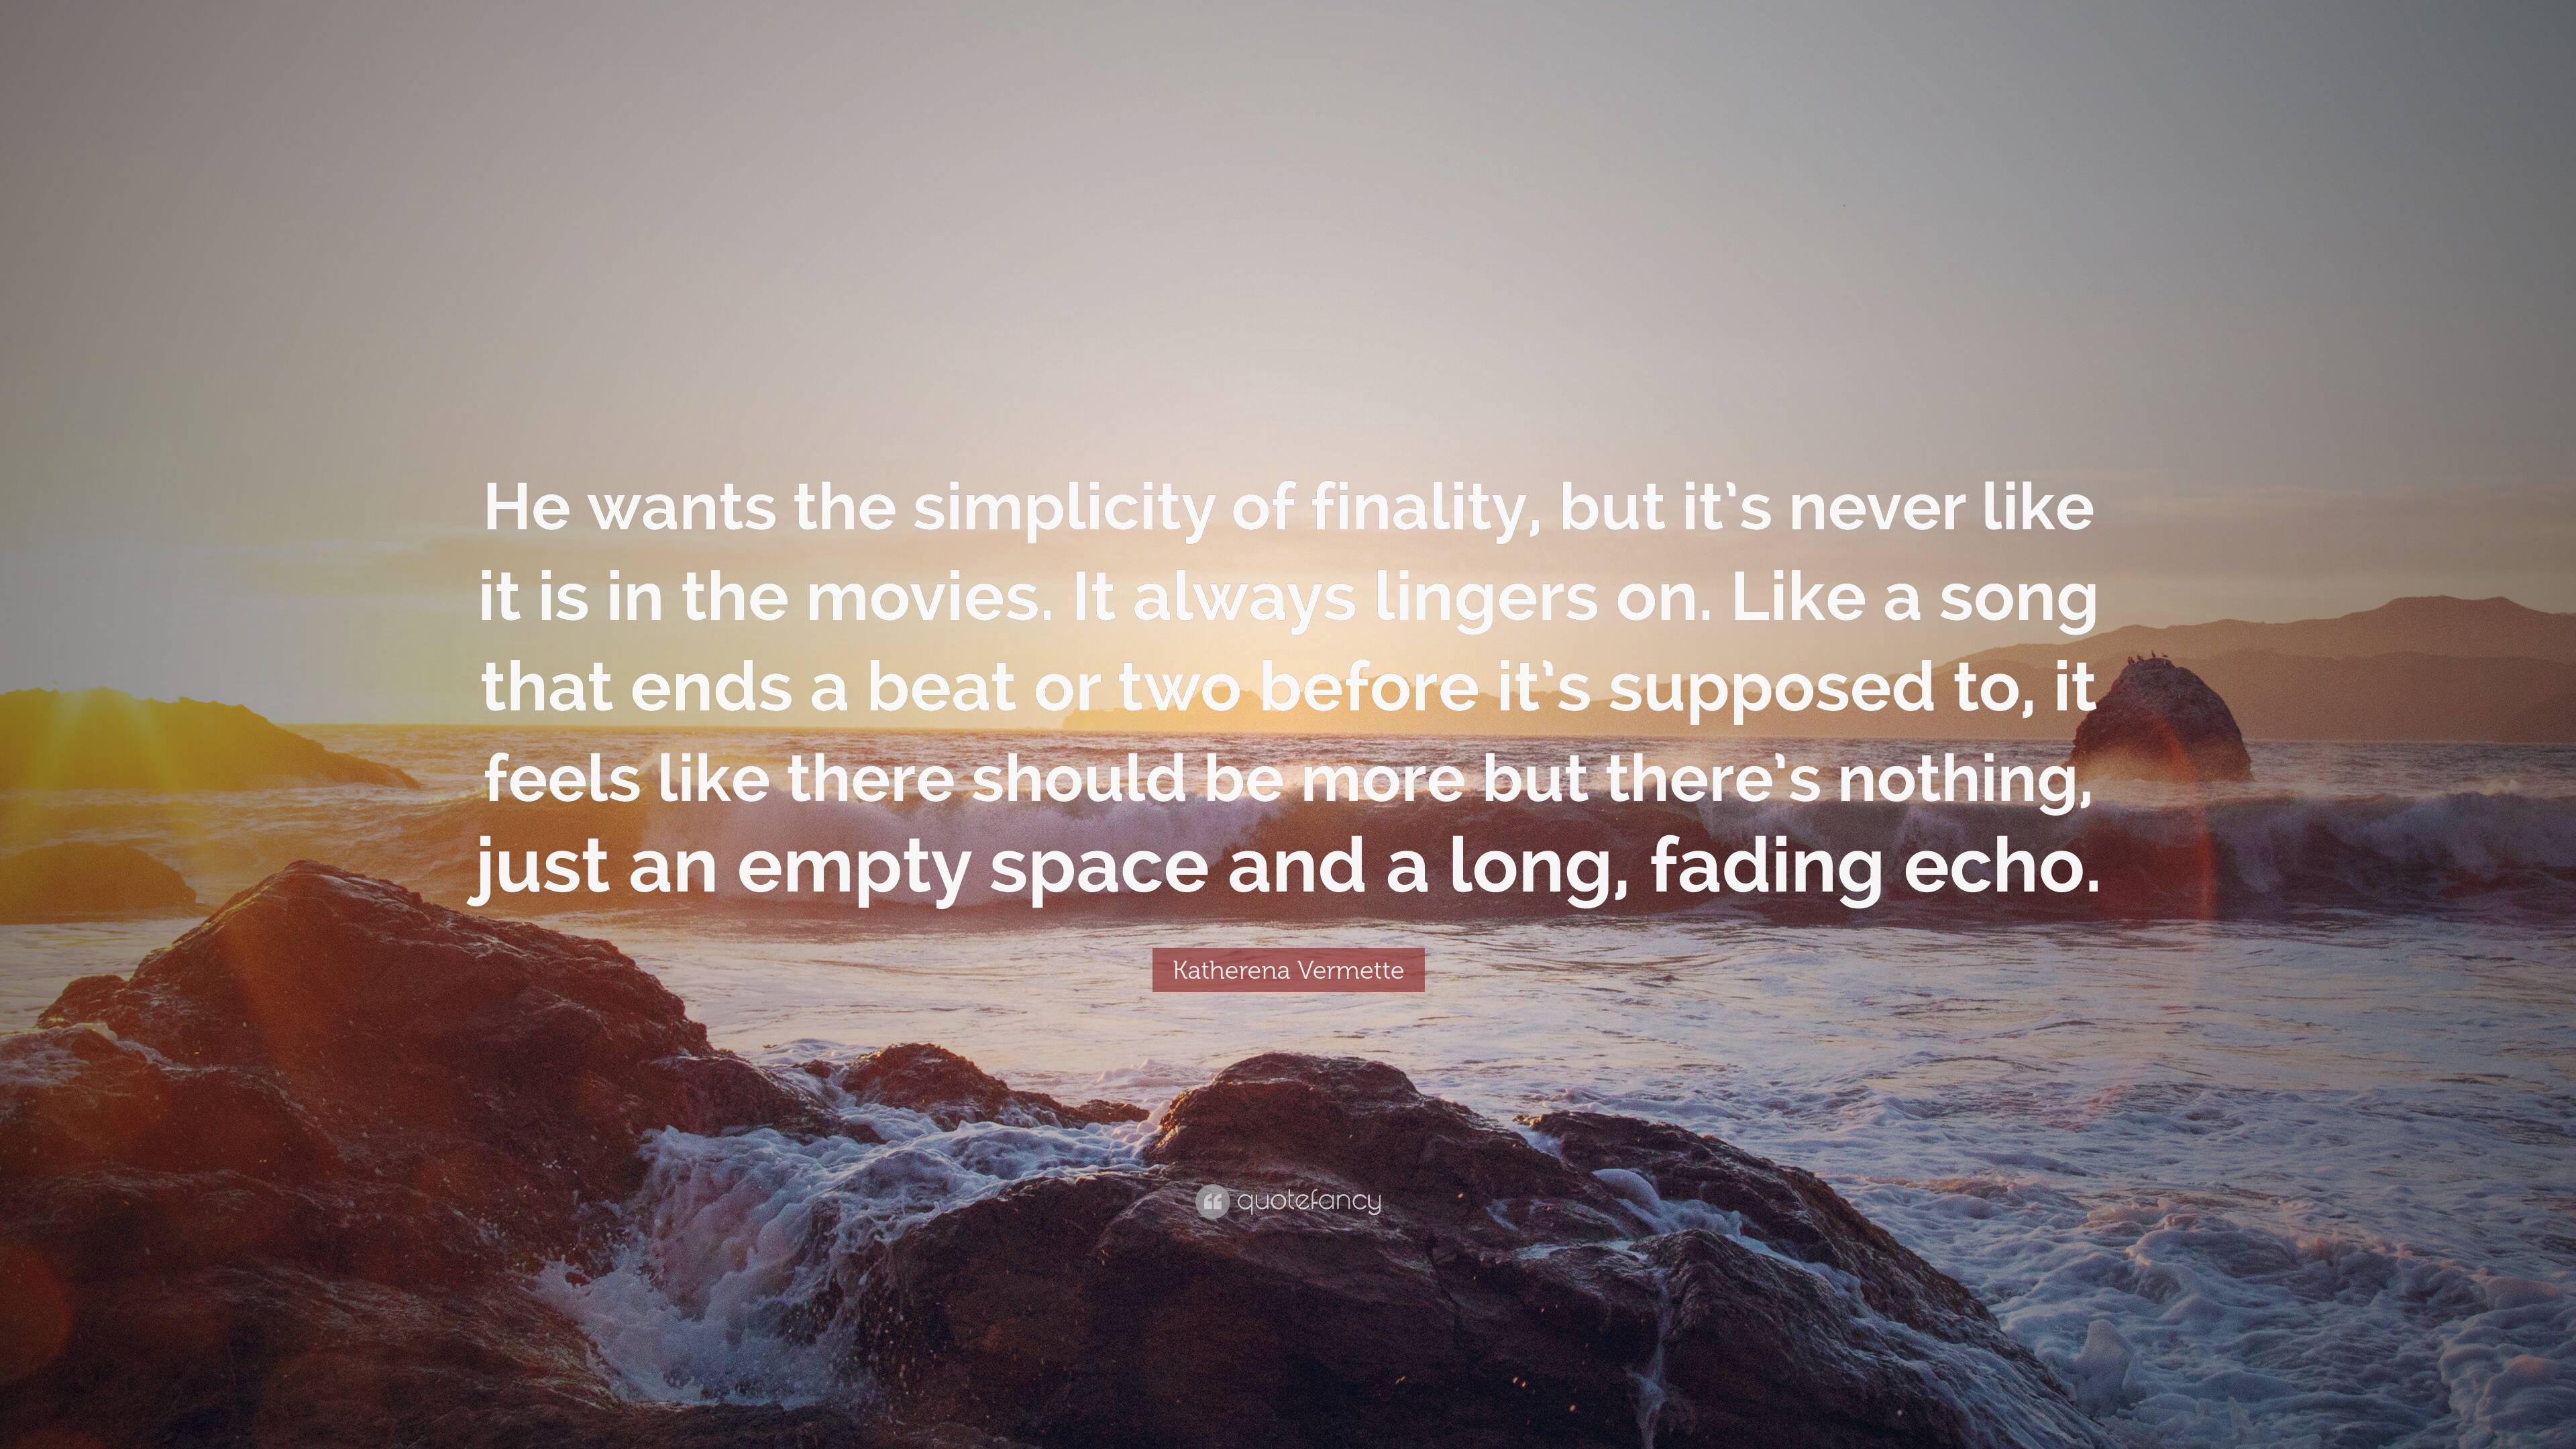 Katherena Vermette Quote: “He wants the simplicity of finality, but it ...